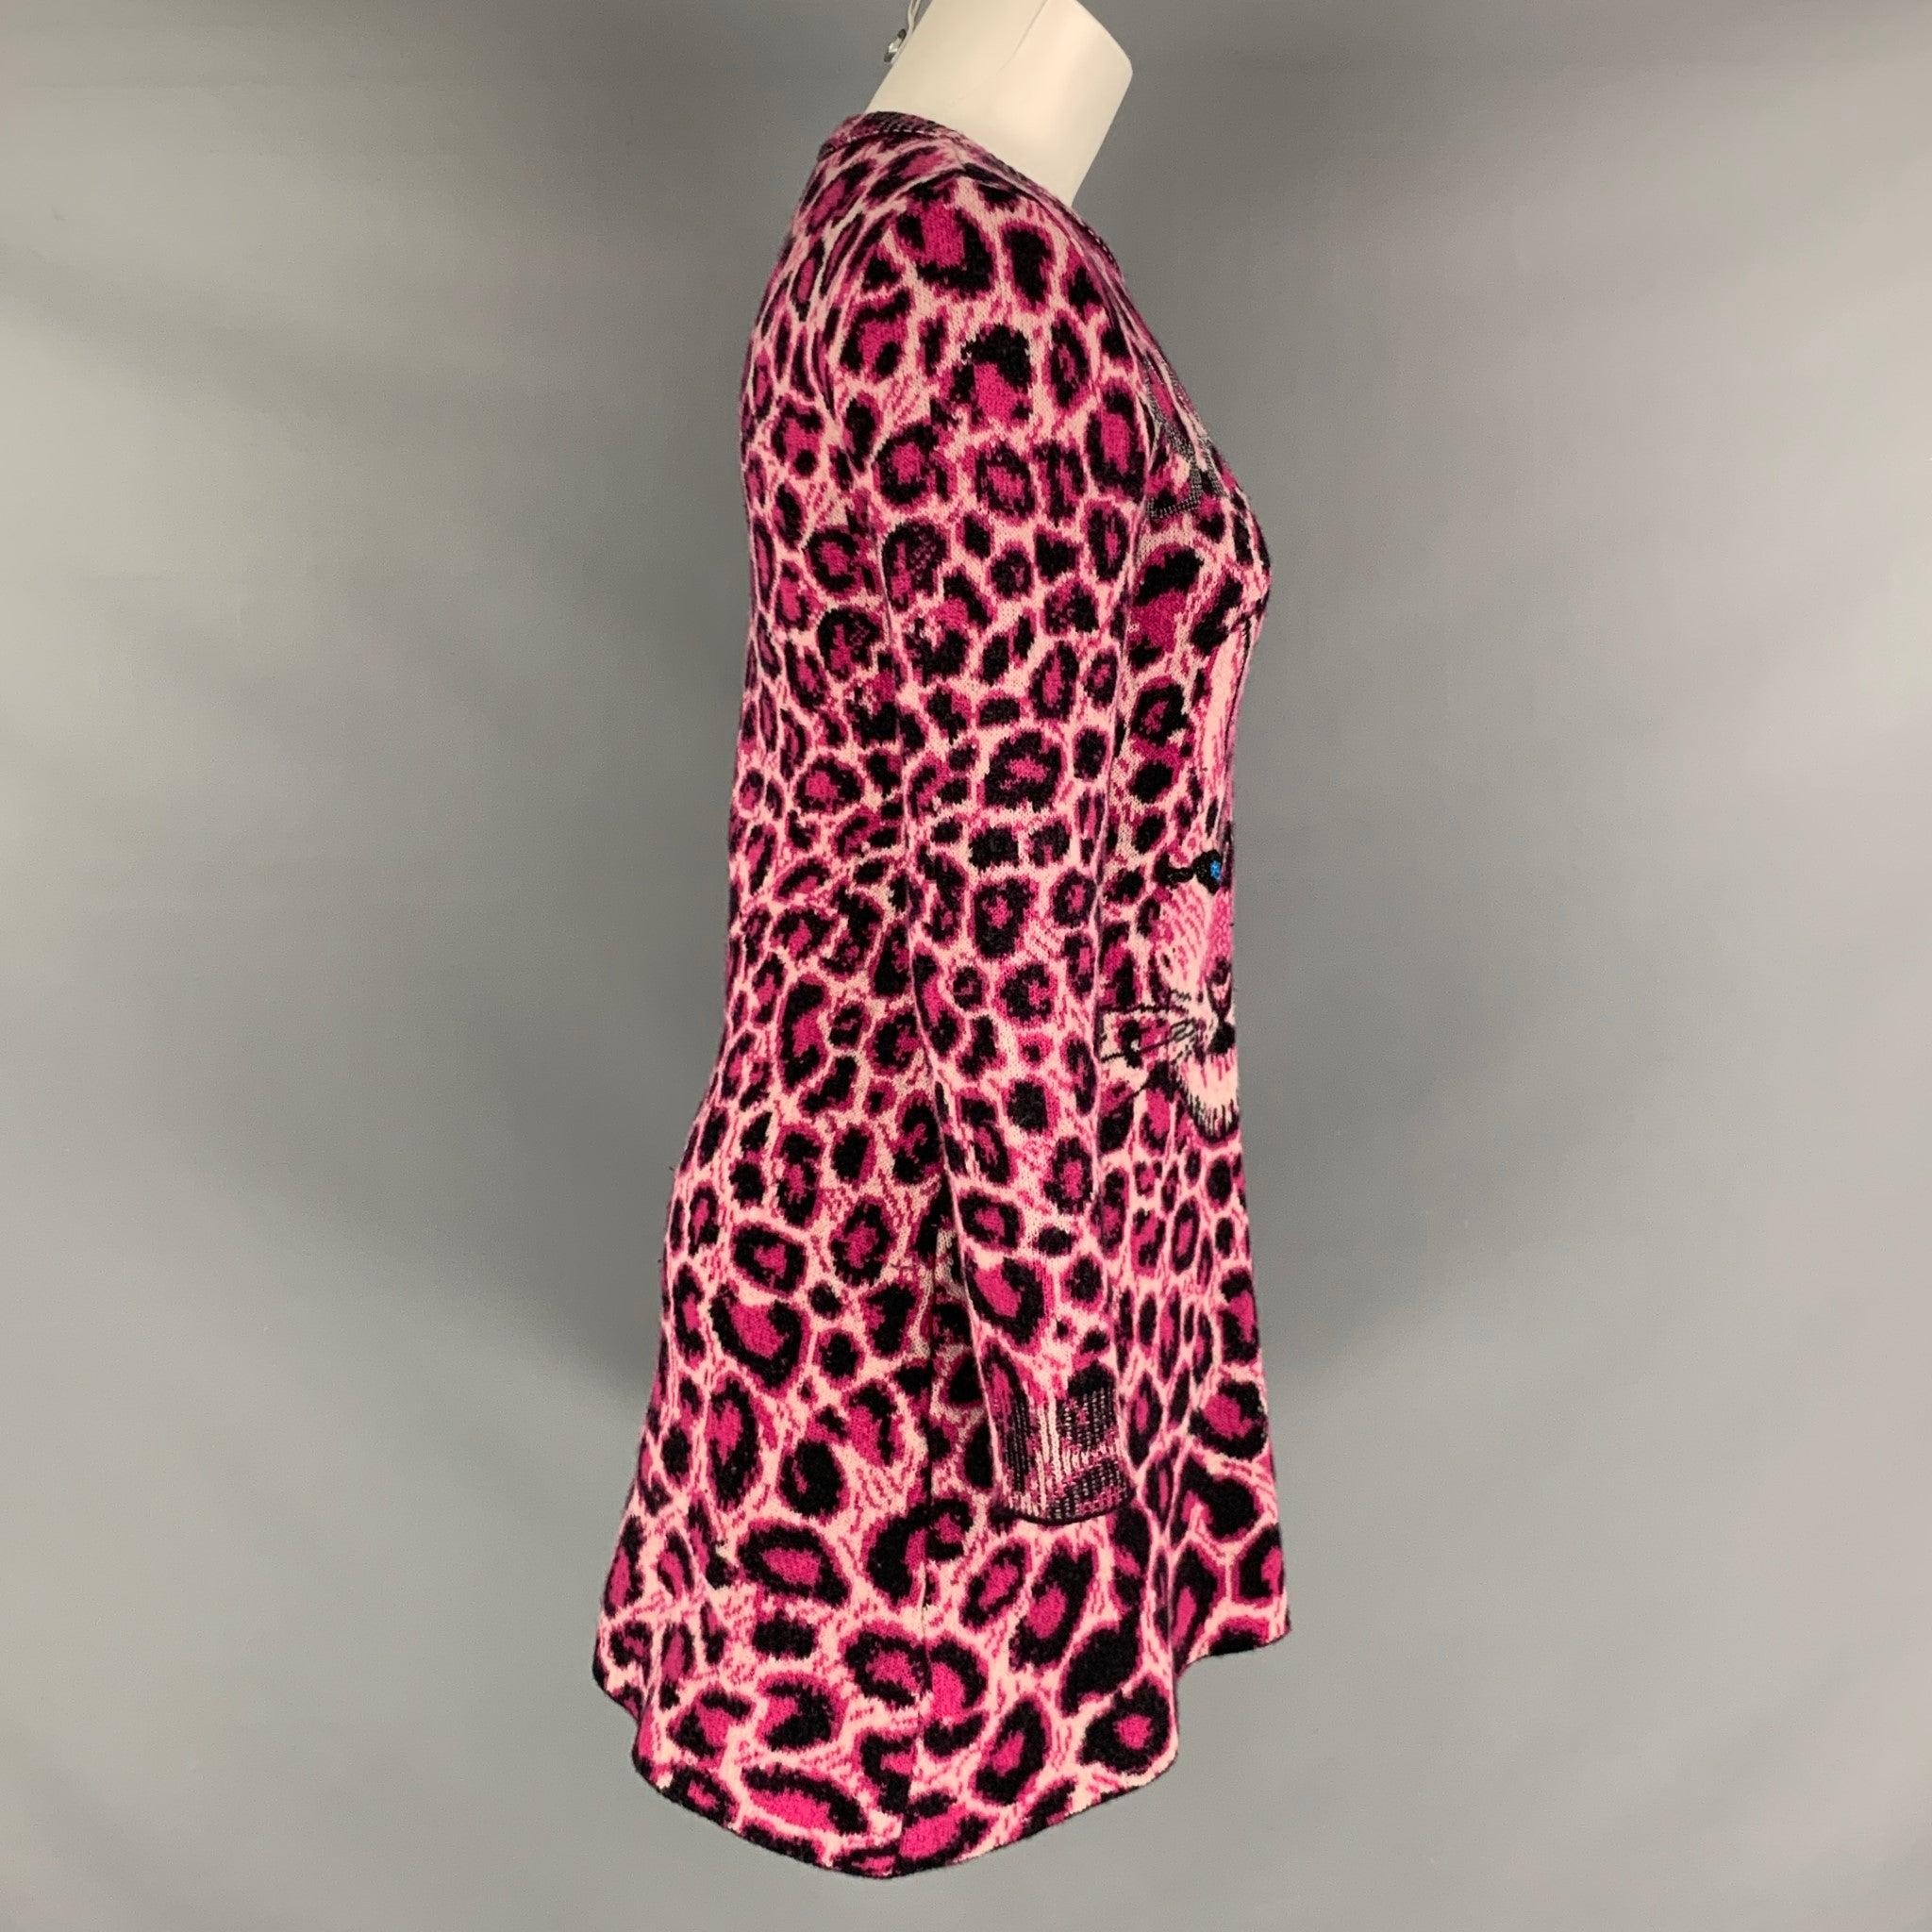 ALBERTA FERRETTI long sleeve dress comes in a black and pink virgin wool knit material featuring an animal print, and embroidery eyes. Made in Italy.Very Good Pre-Owned Condition. Minor signs of wear. AS IS. 

Marked:  36 

Measurements: 
